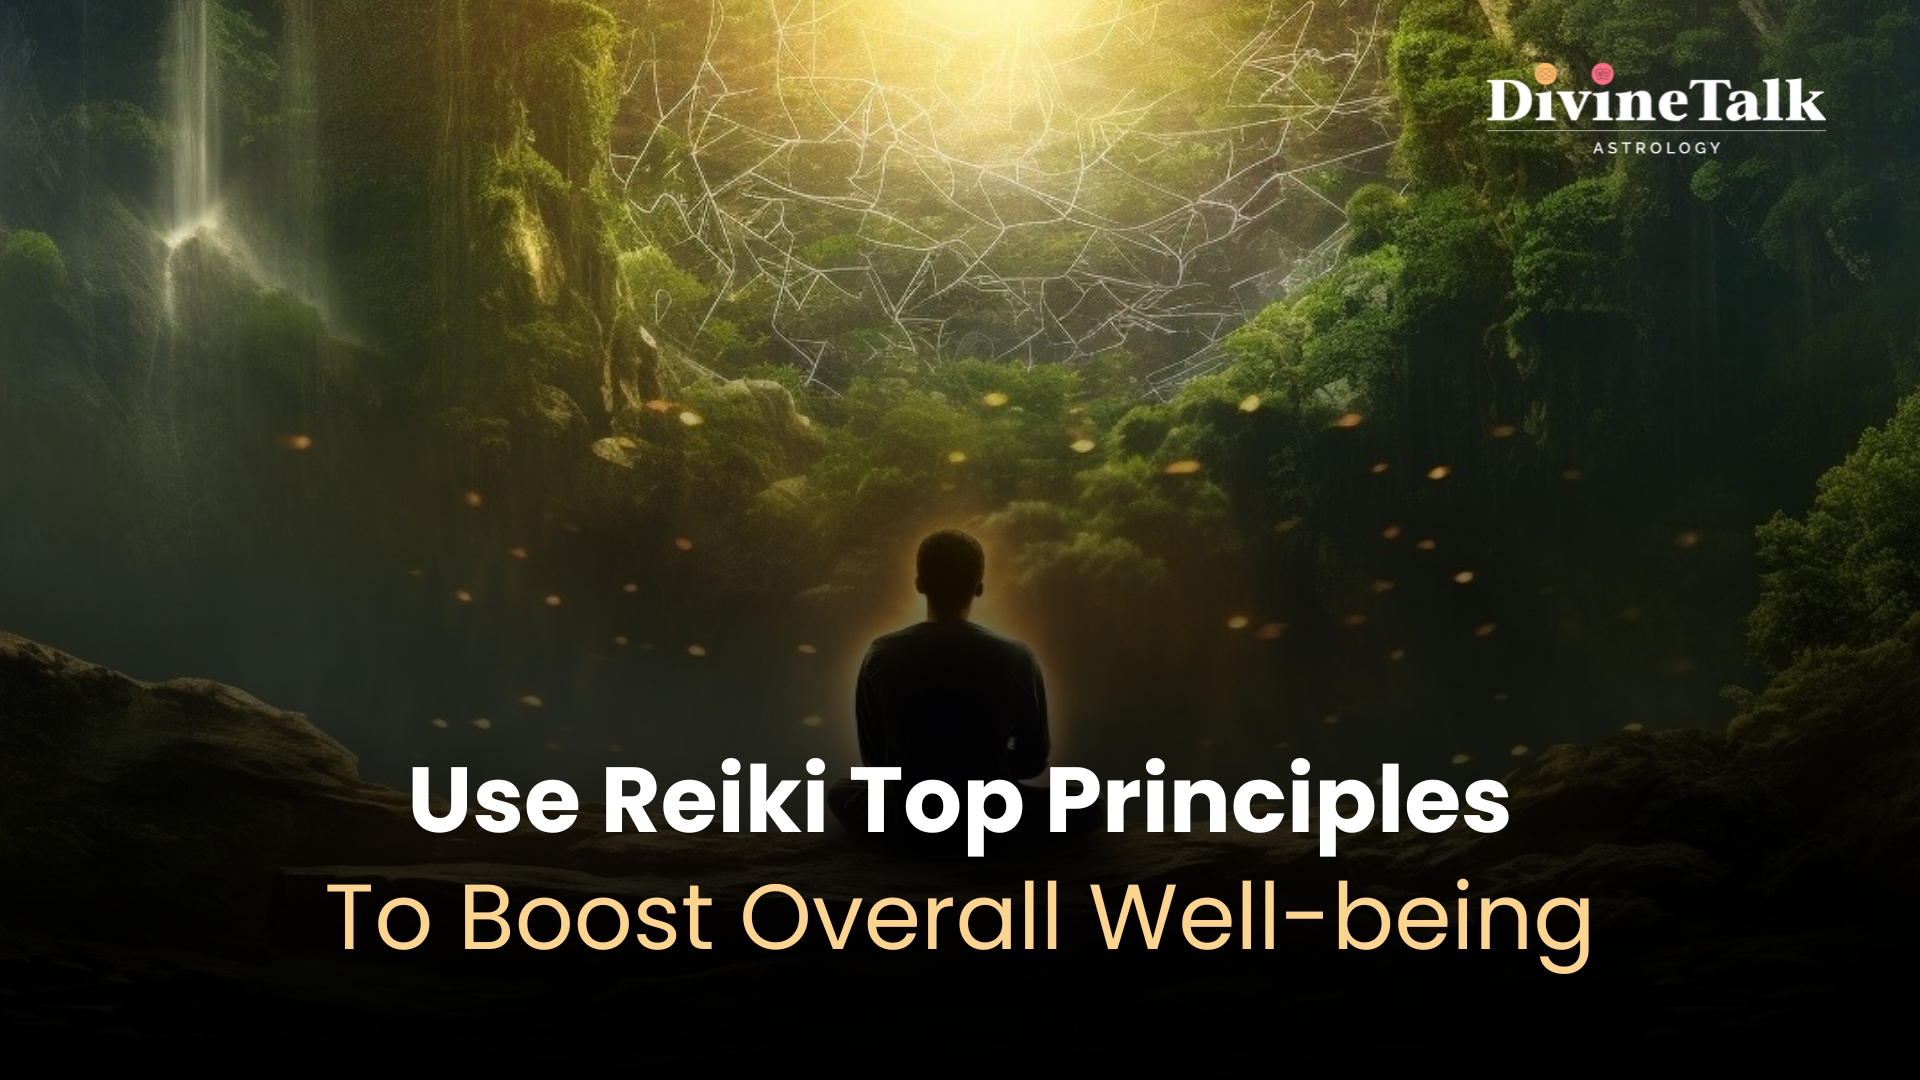 Use Reiki Top Principles To Boost Overall Well-being(1)